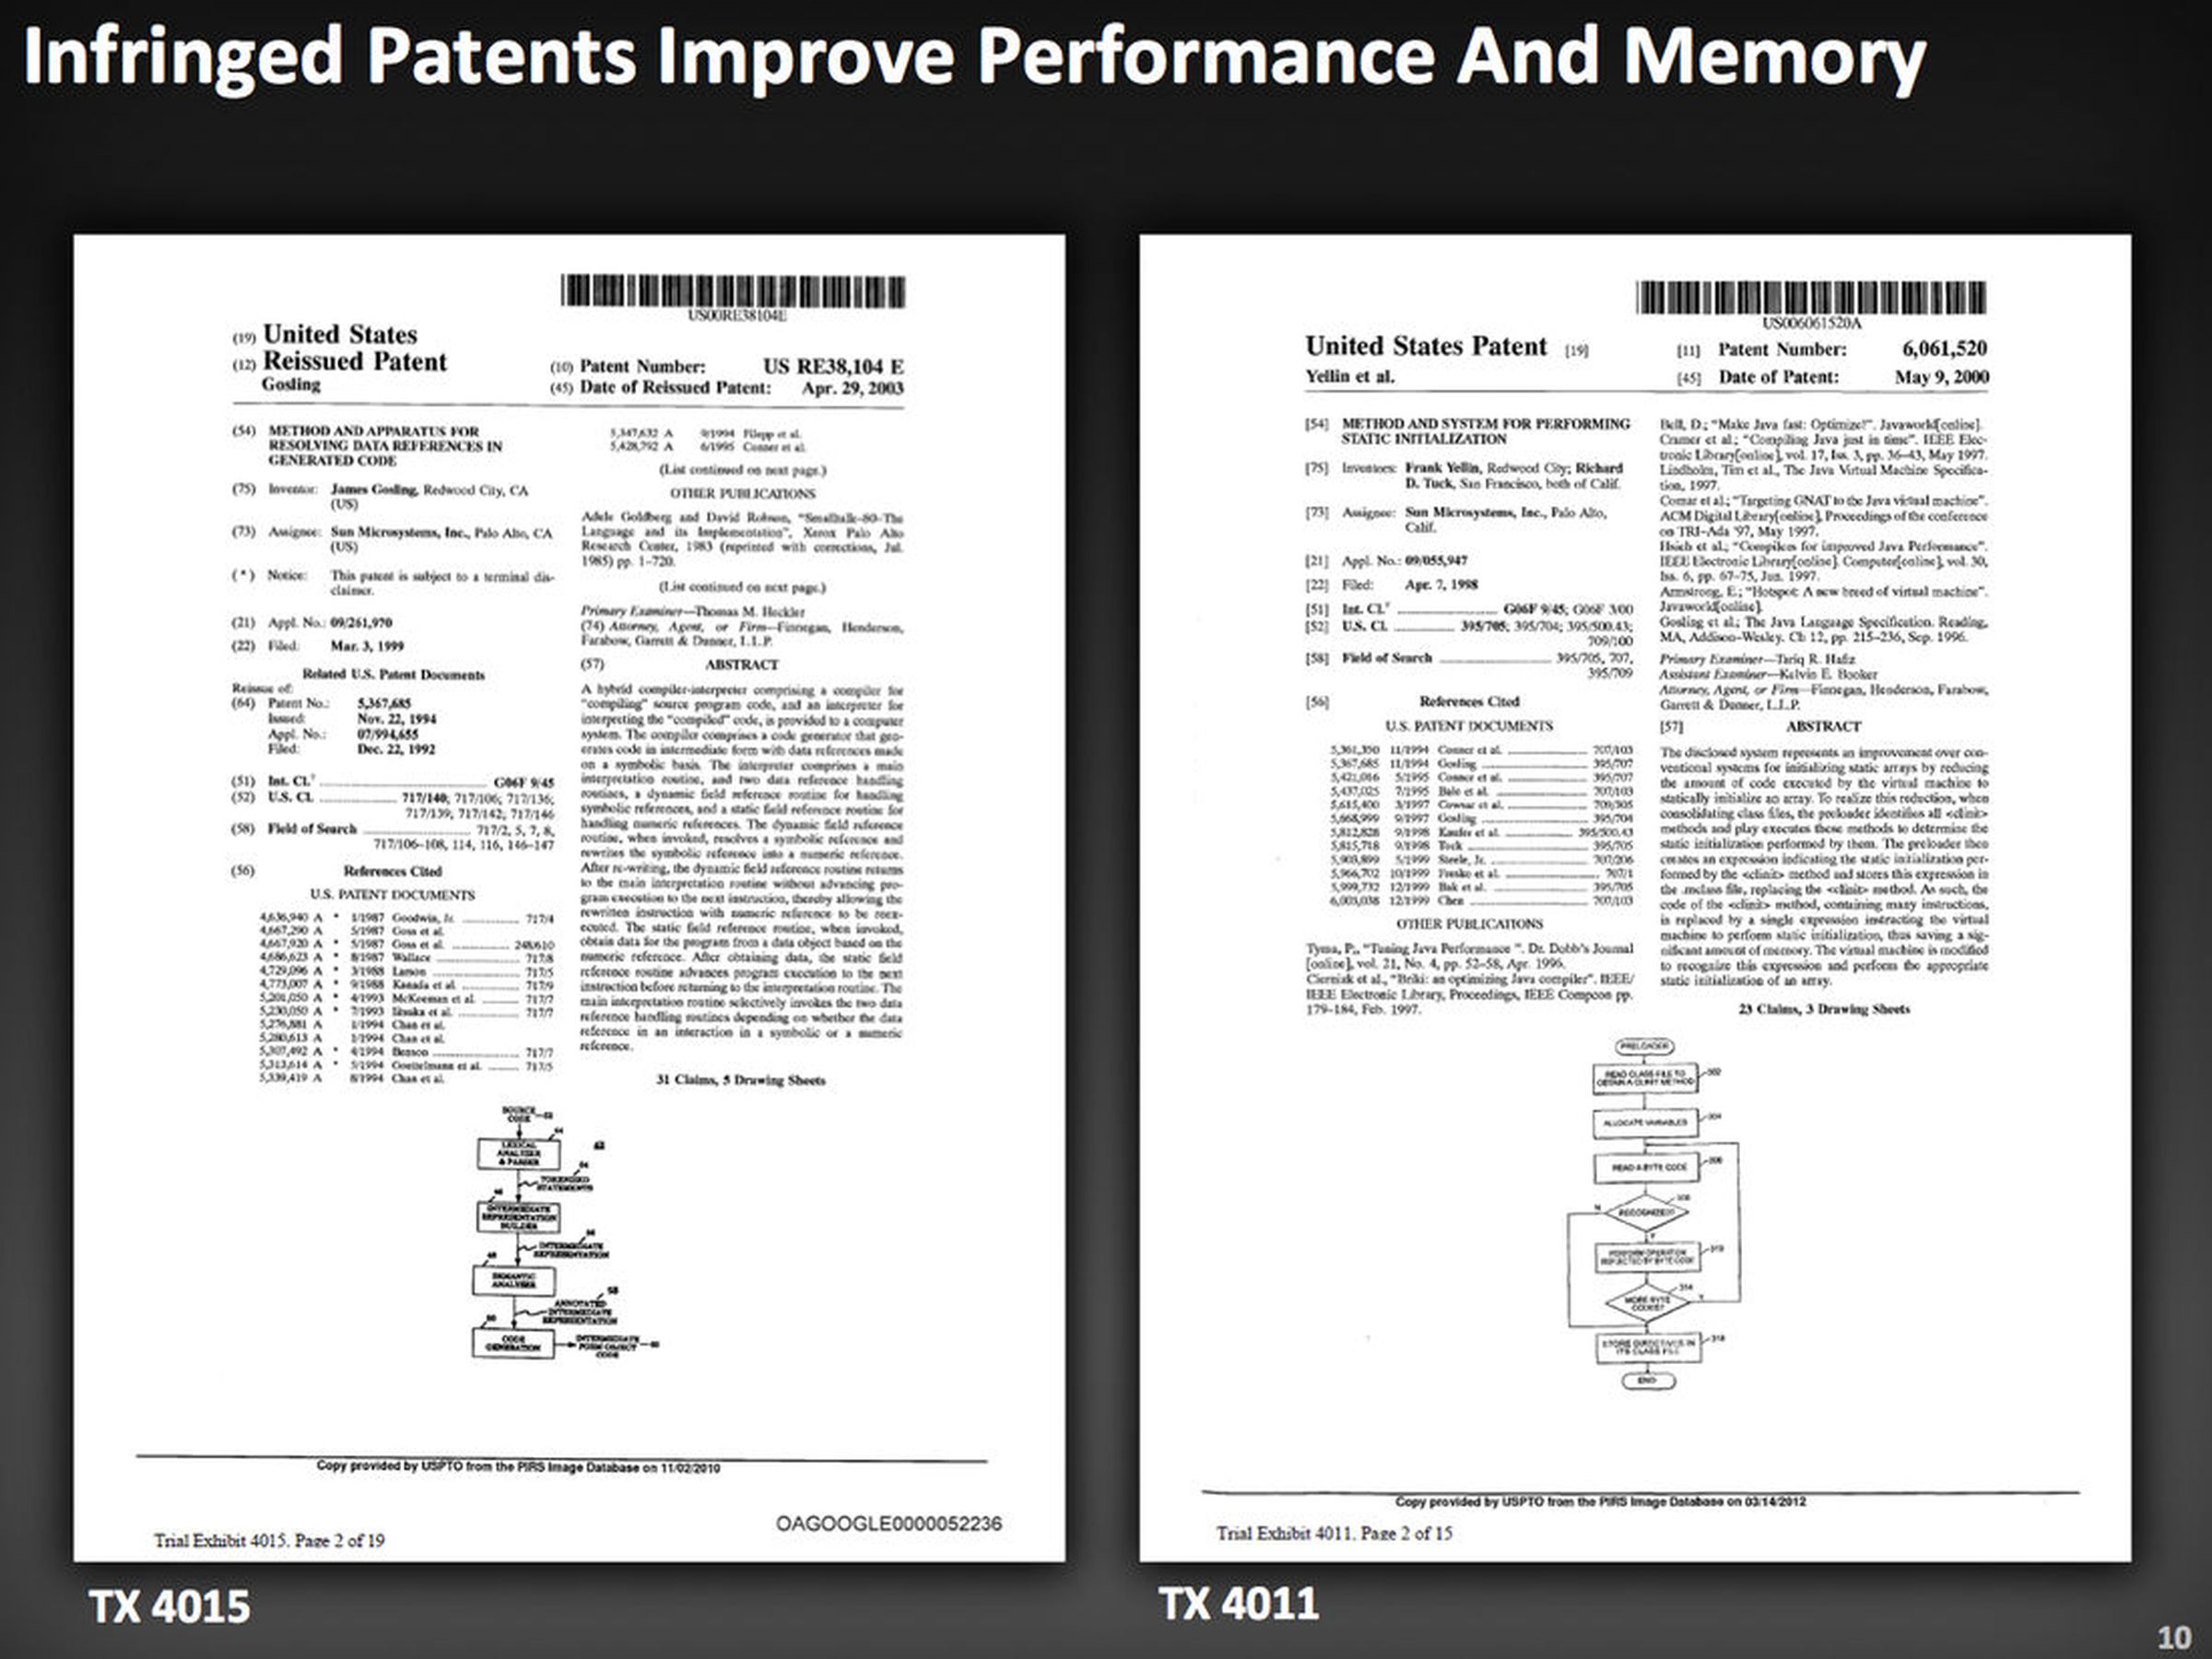 Select slides from Oracle's patent case opening statement